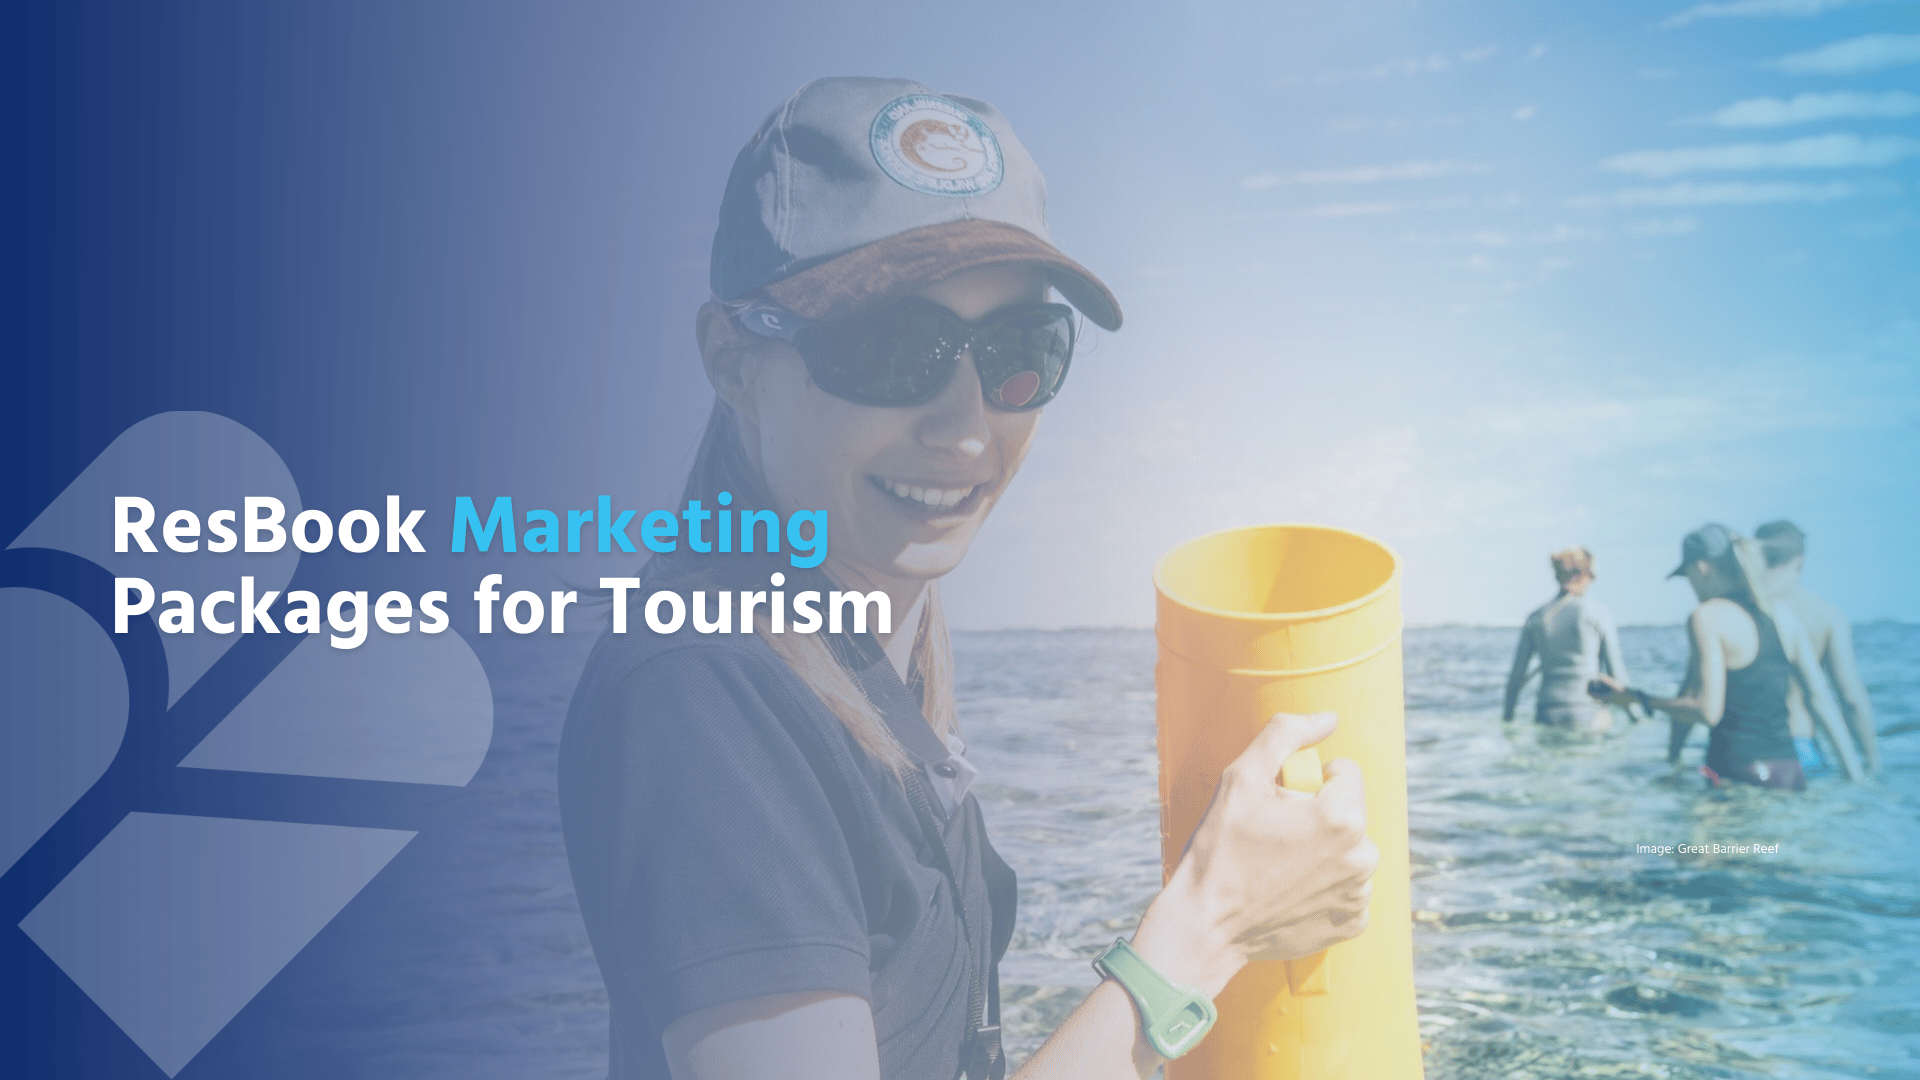 ResBook Marketing Packages for Tourism